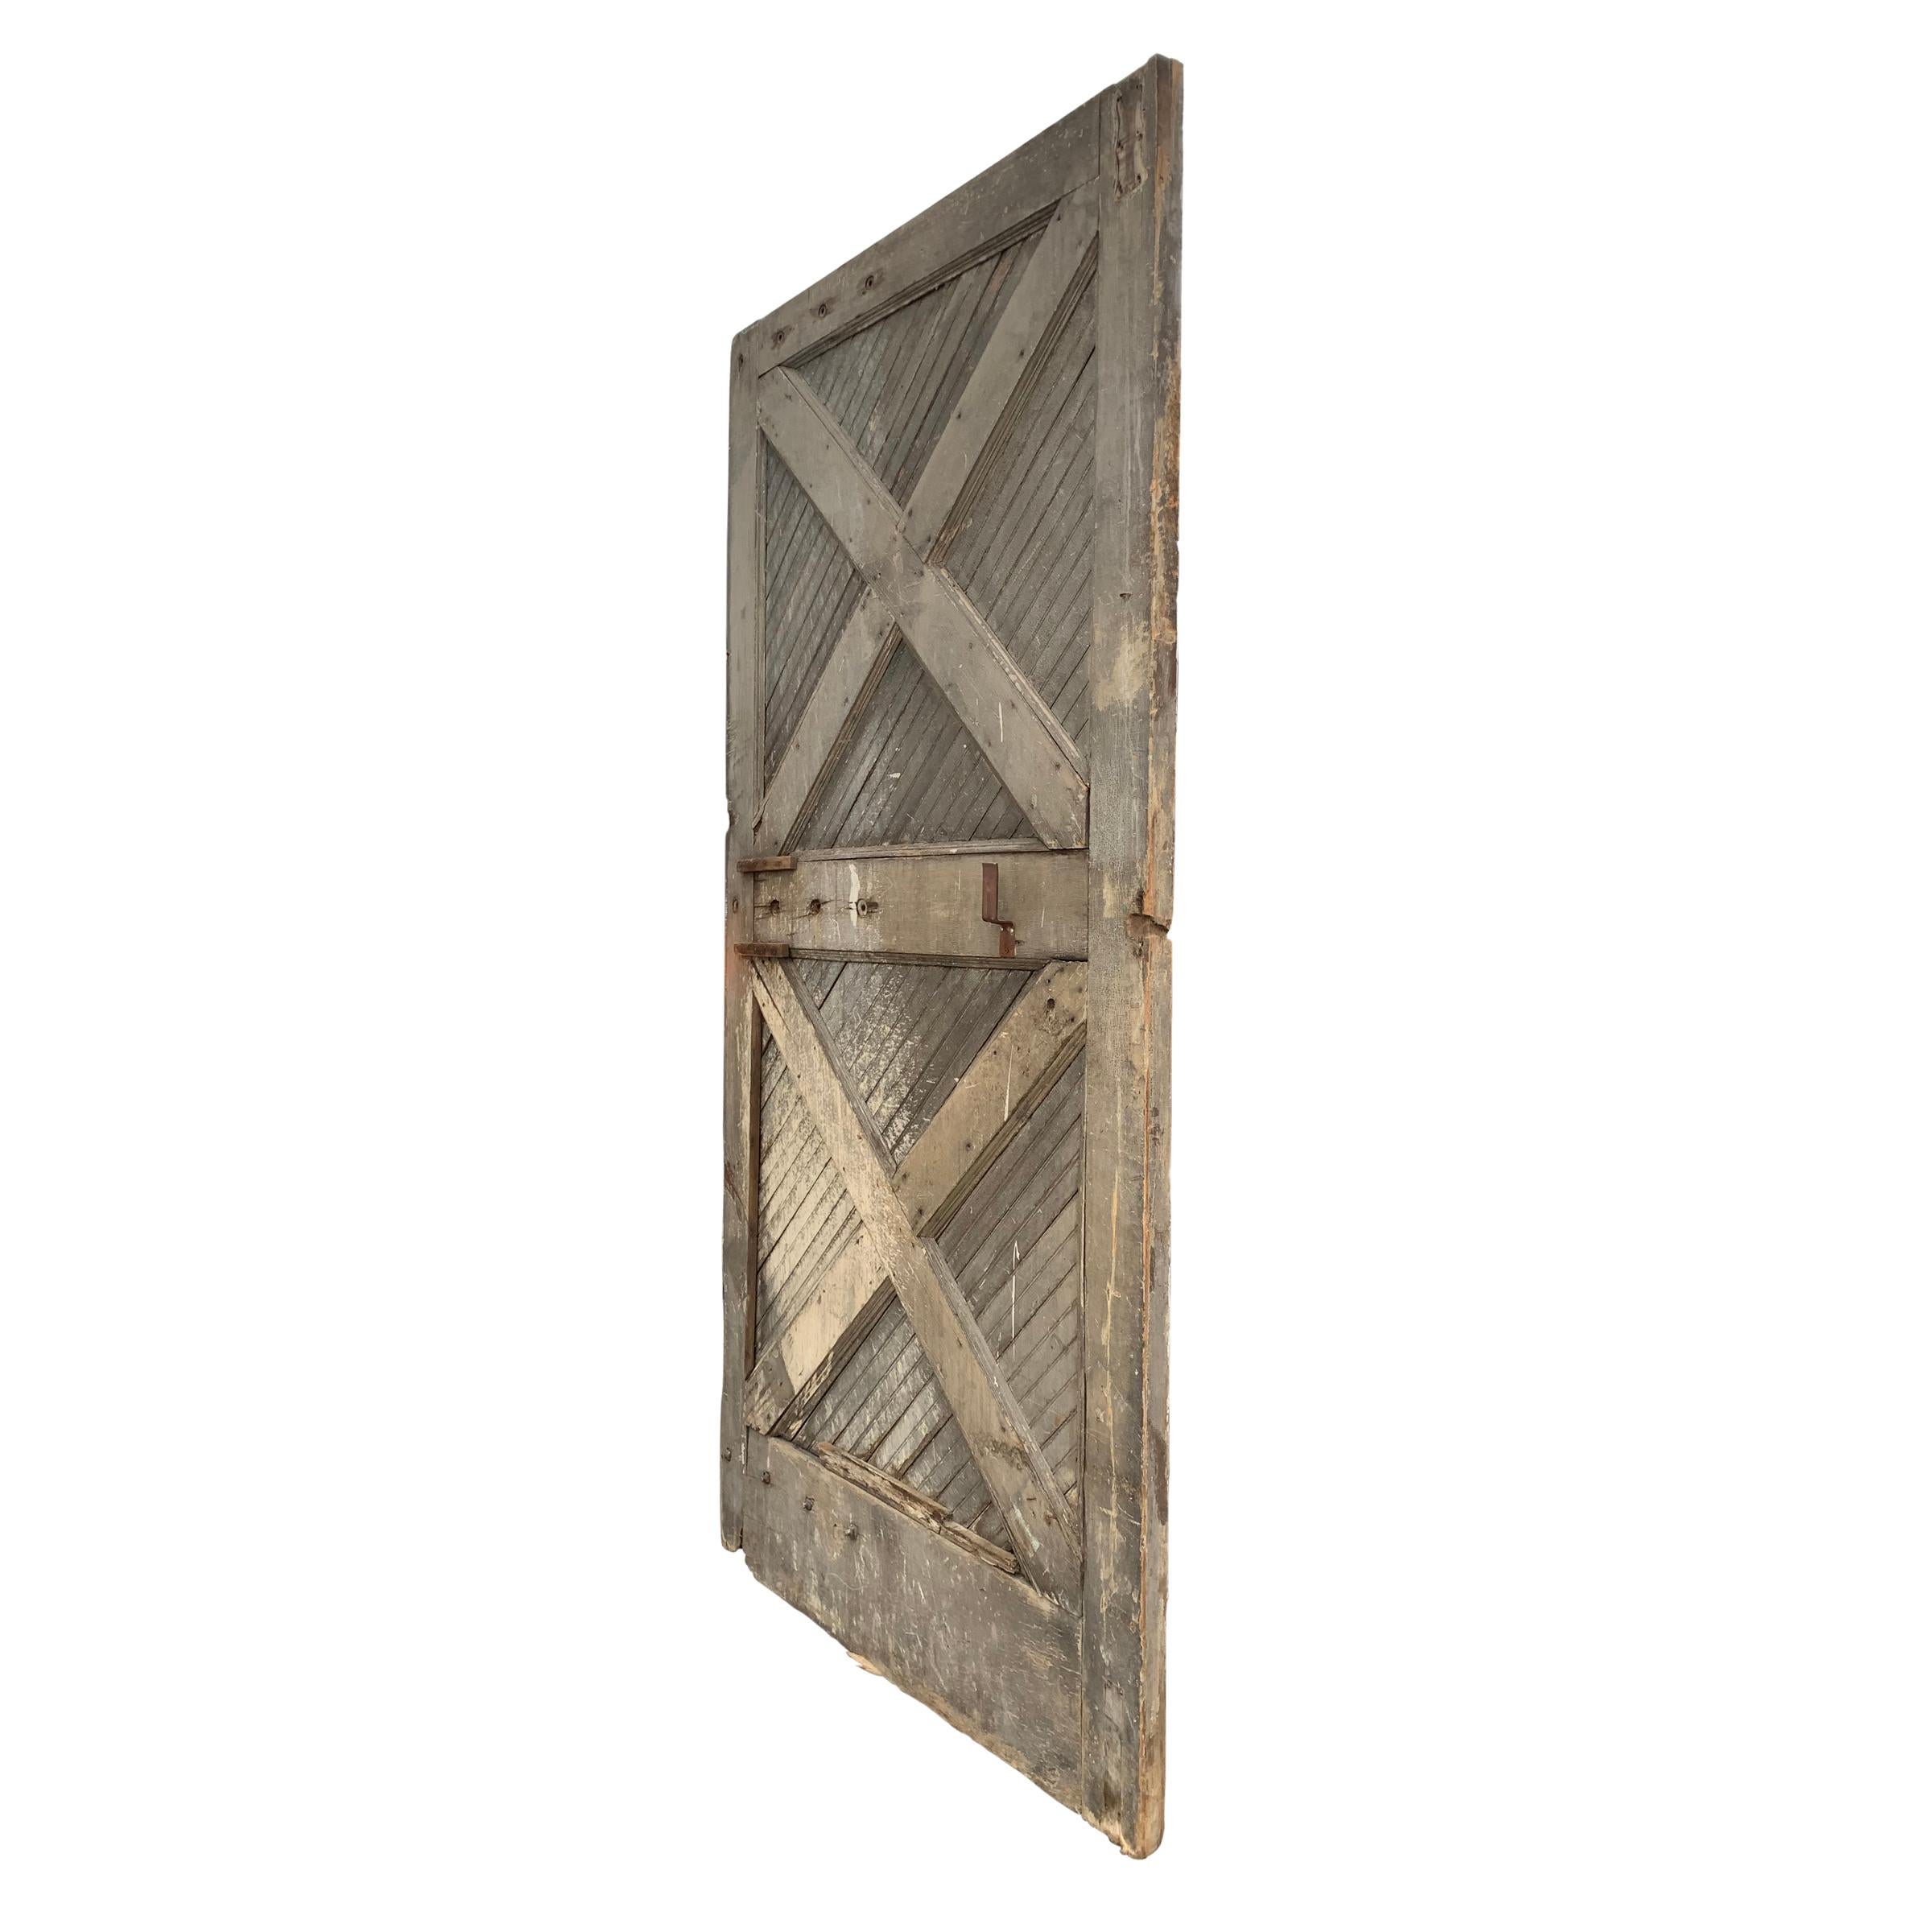 A monumental 19th century American barn door with two large X supports across the front, with diagonal painted beadboard with an alligator finish splashed with white paint, and large iron hardware that is original to the door.  This would make the